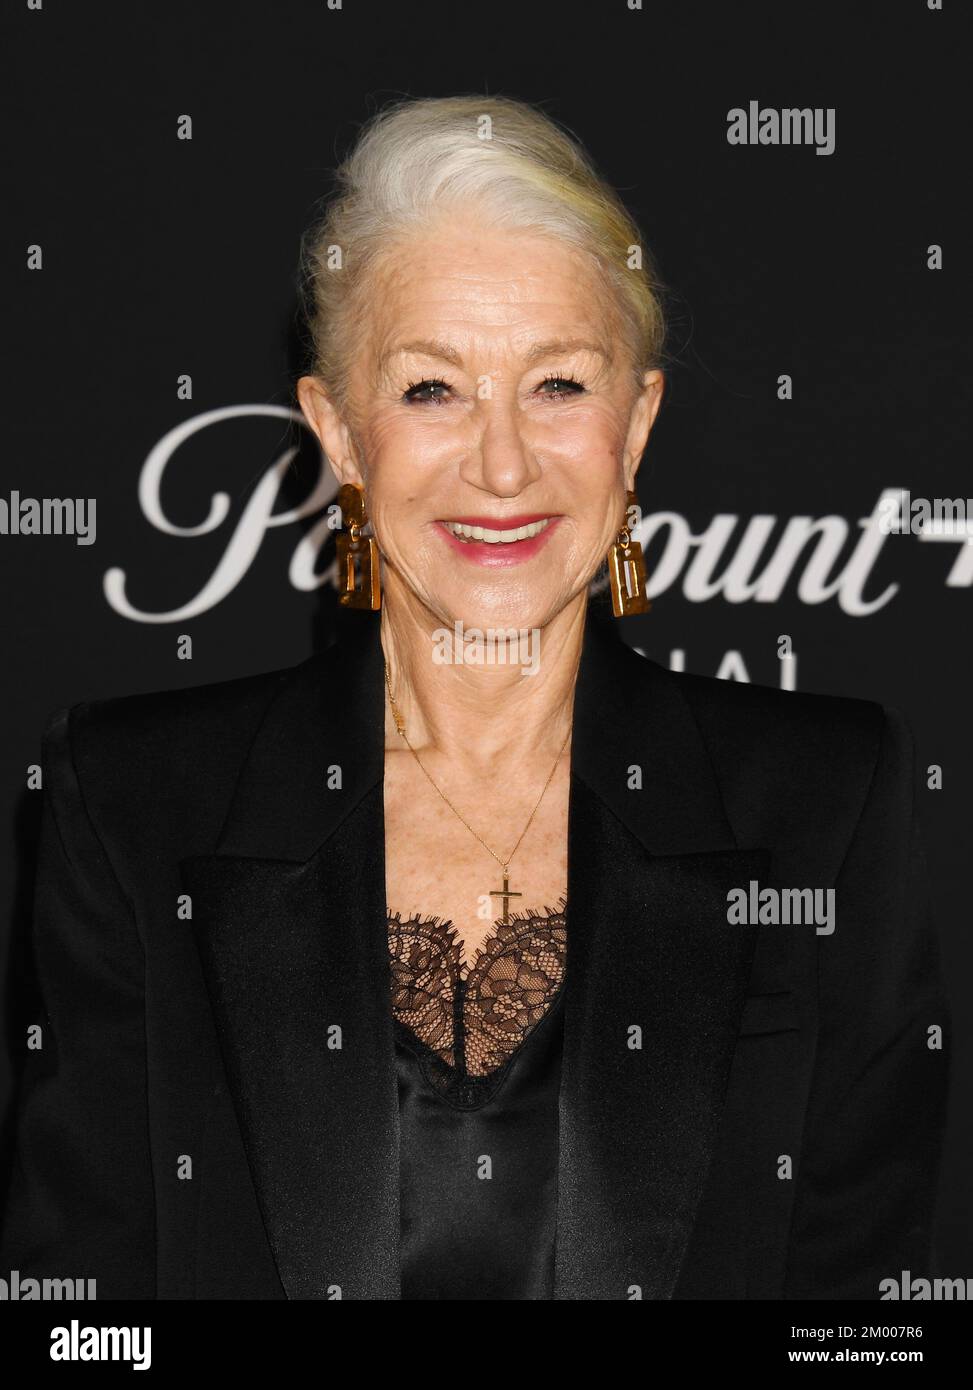 LOS ANGELES, CALIFORNIA - DECEMBER 02: Helen Mirren attends the Los Angeles Premiere Of Paramount+'s '1923' at Hollywood American Legion on December 0 Stock Photo